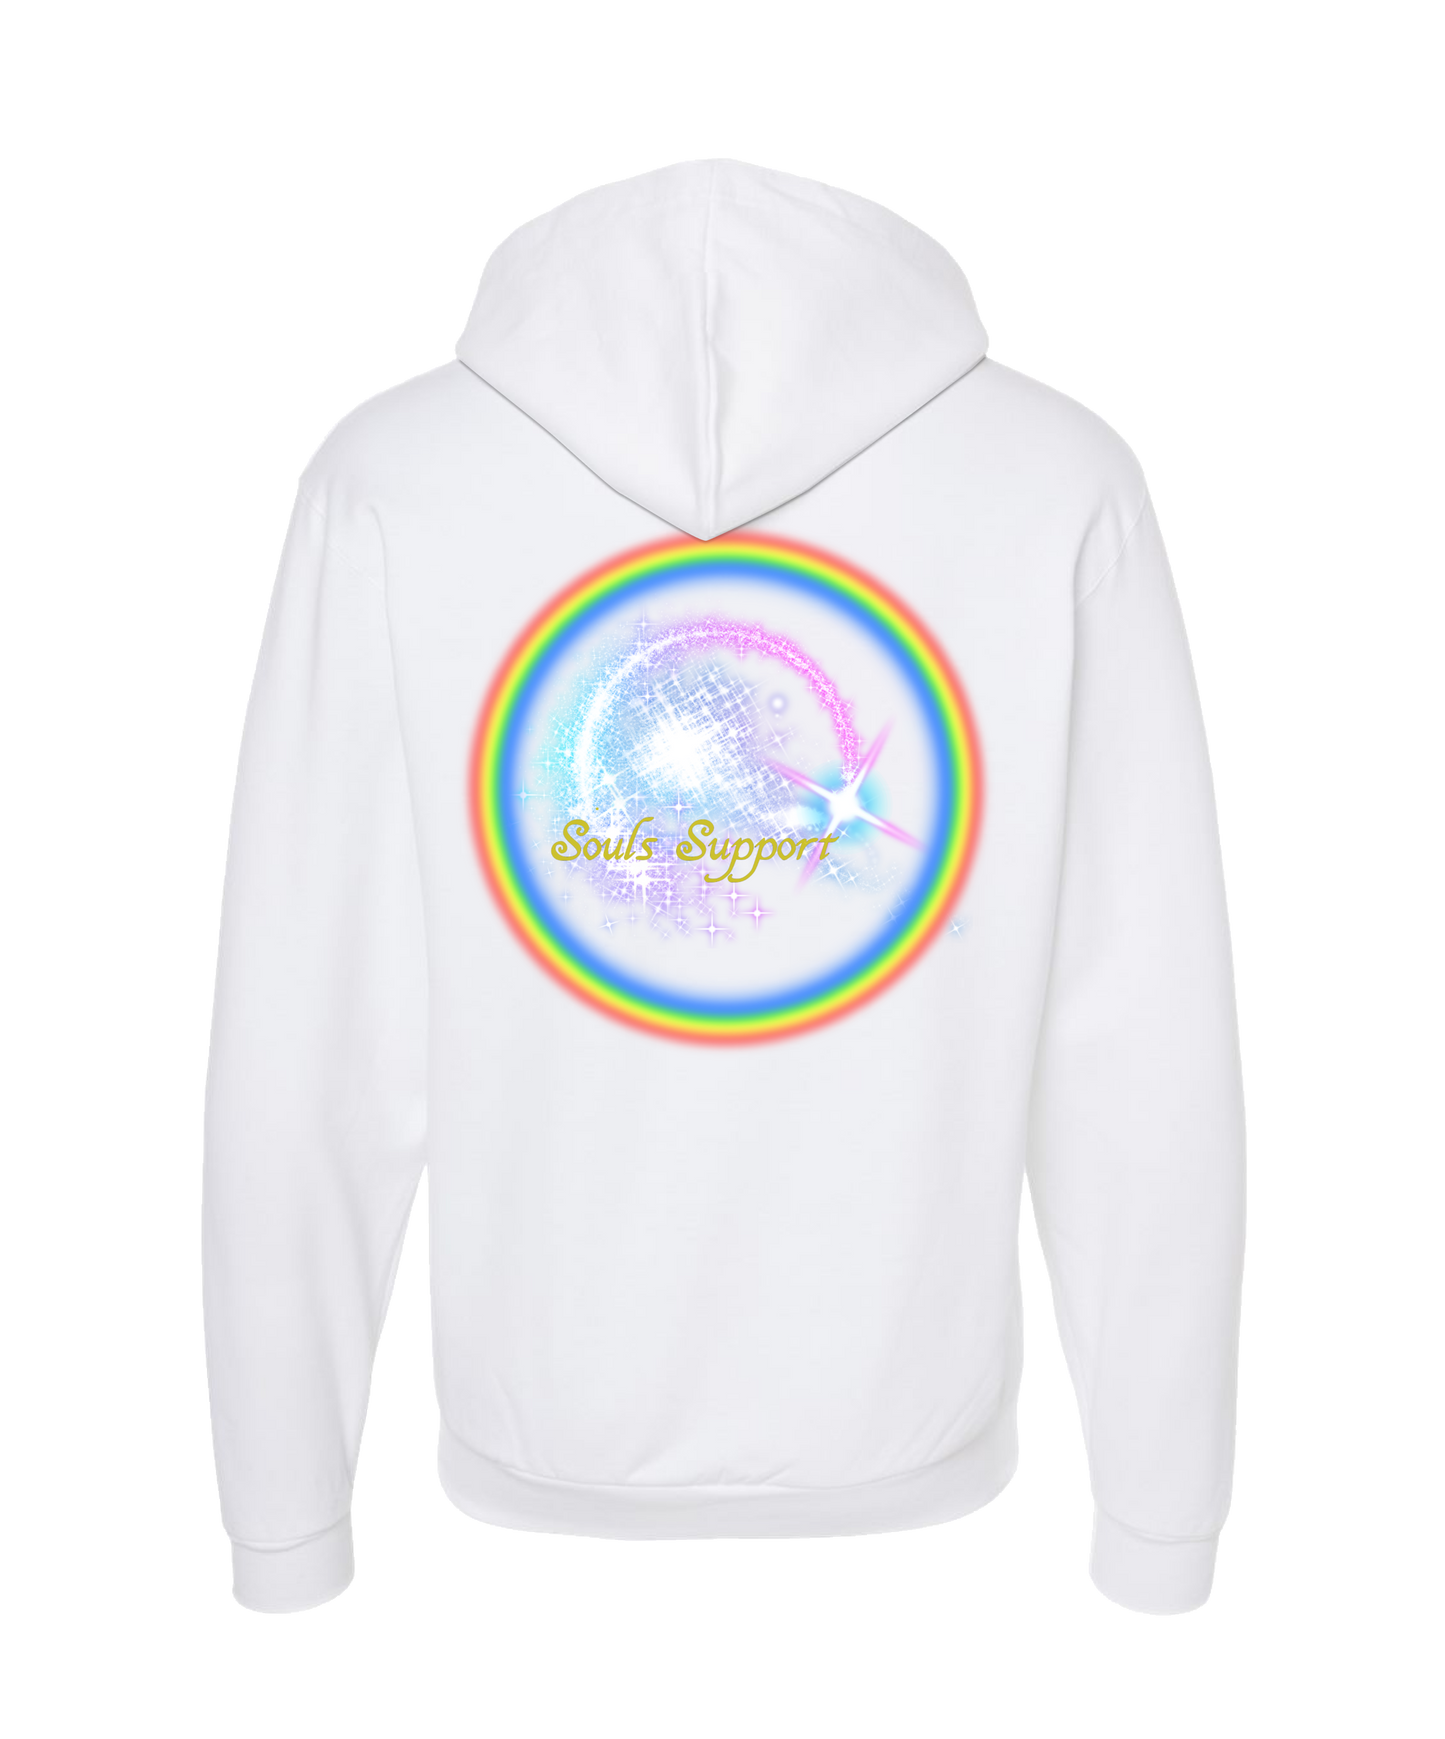 Souls Support - DESIGN 1 - White Zip Up Hoodie